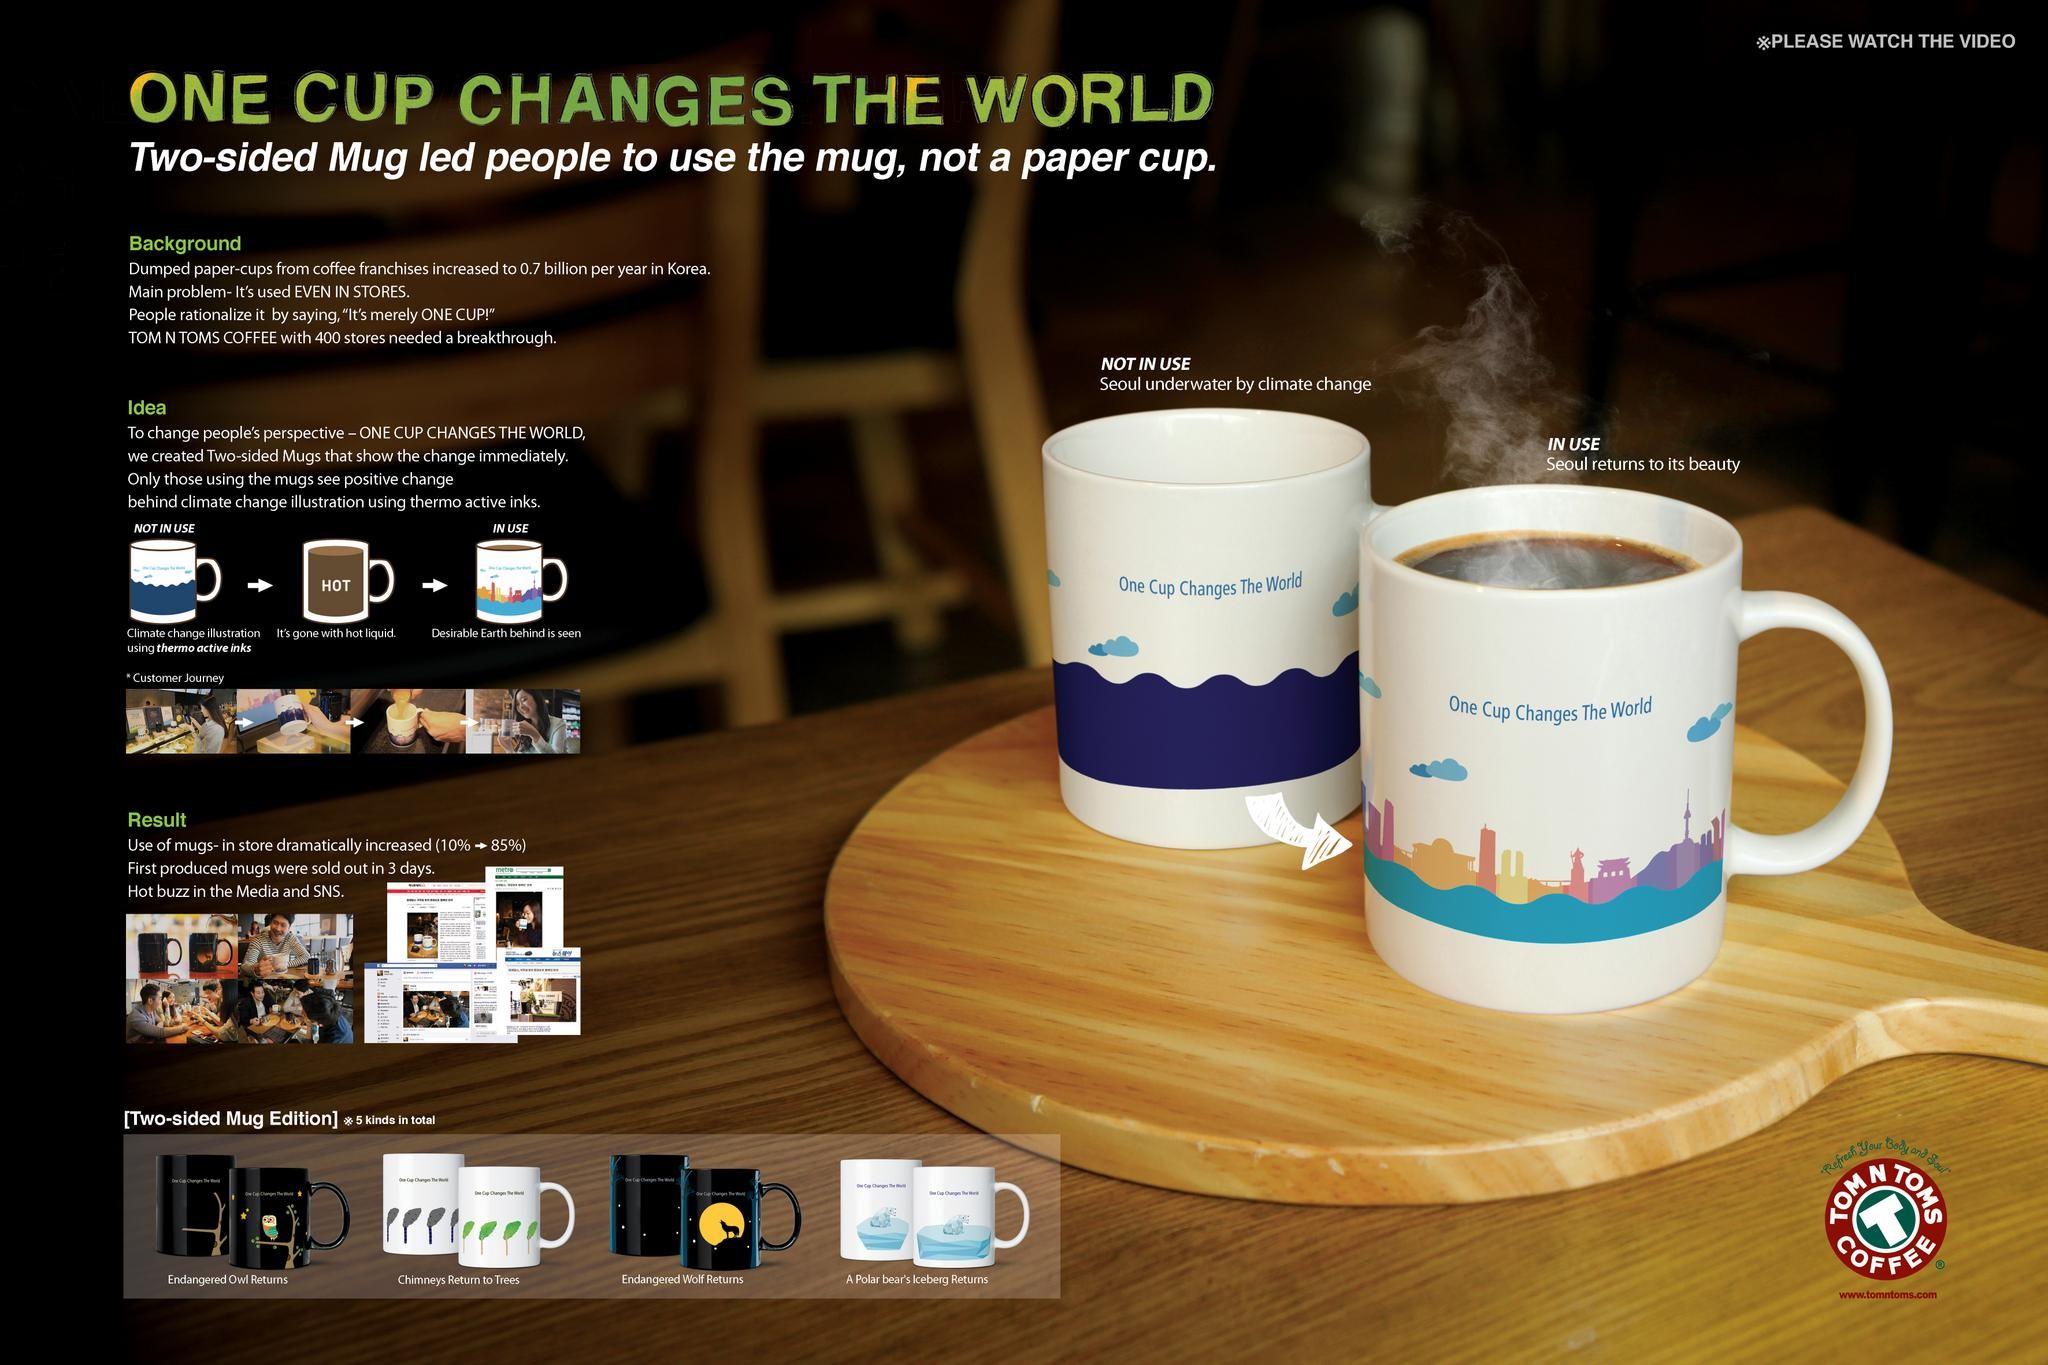 ONE CUP CHANGES THE WORLD